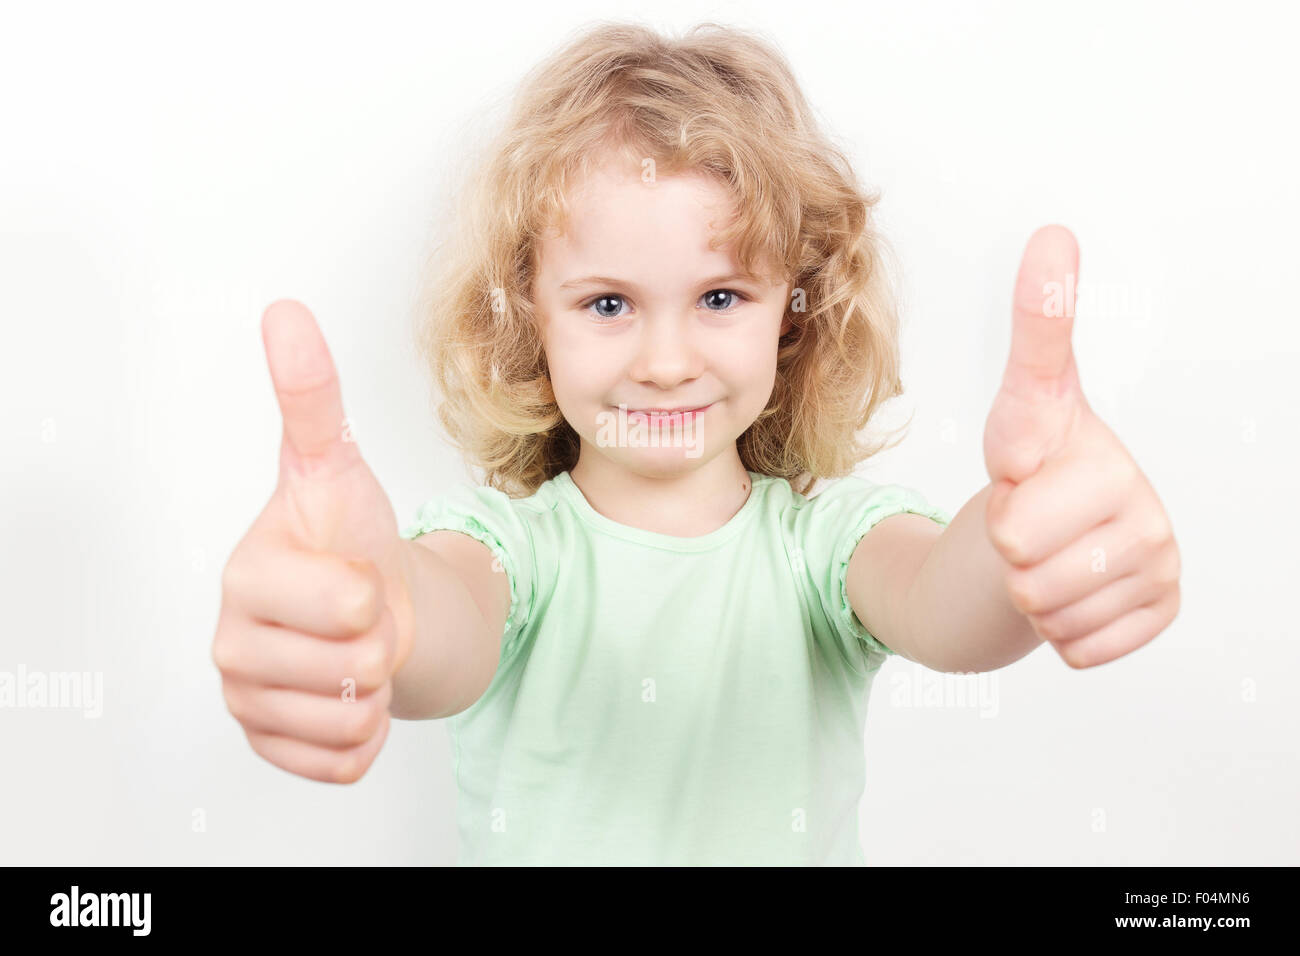 Little girl with thumbs up on white background Stock Photo